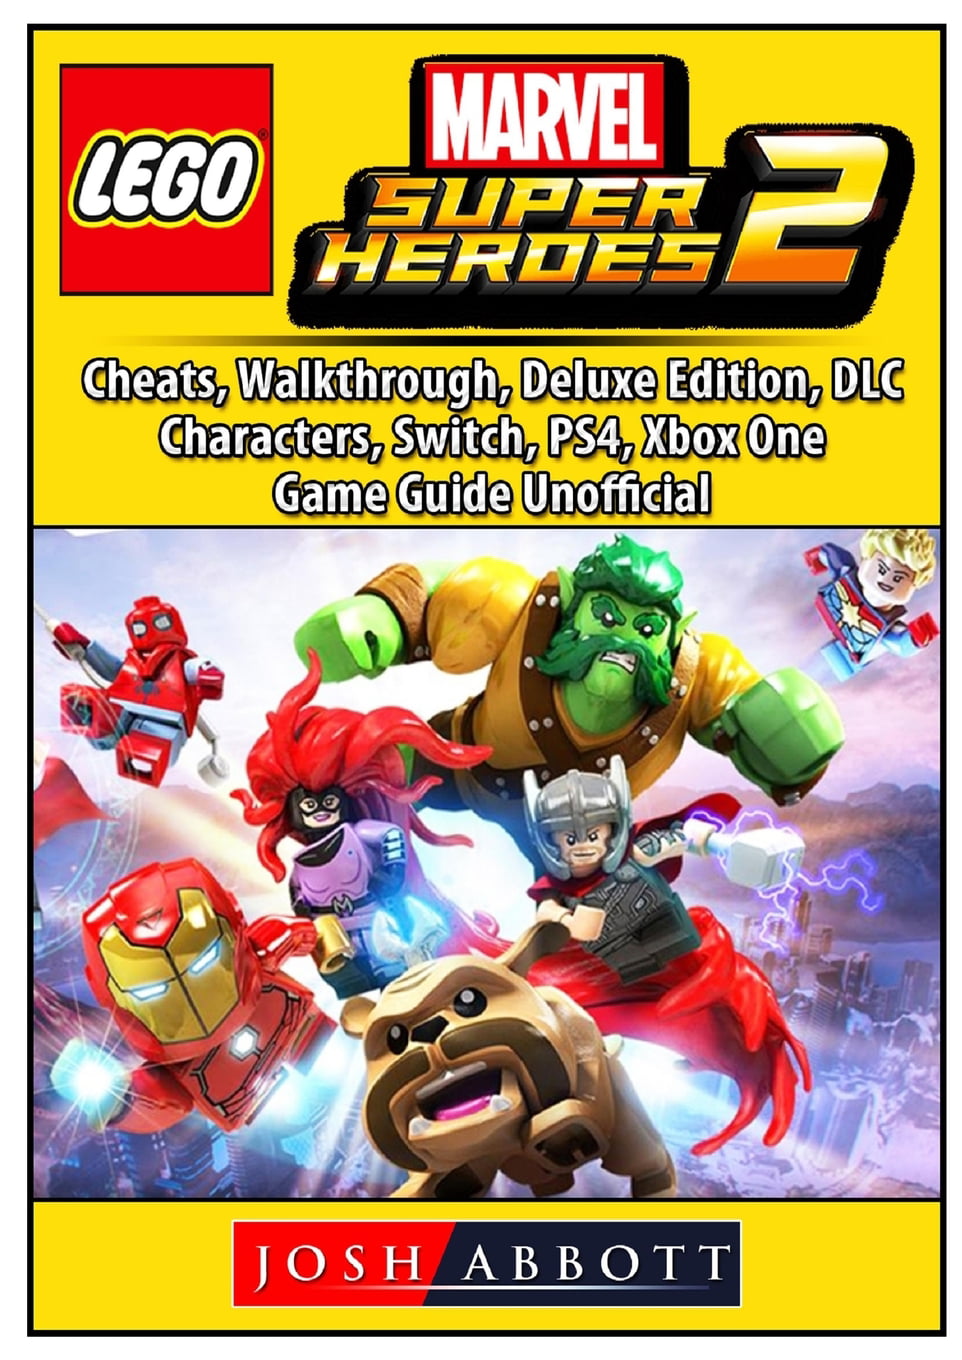 behagelig Cafe kedelig Lego Marvel Super Heroes 2, Cheats, Walkthrough, Deluxe Edition, DLC,  Characters, Switch, PS4, Xbox One, Game Guide Unofficial - Walmart.com